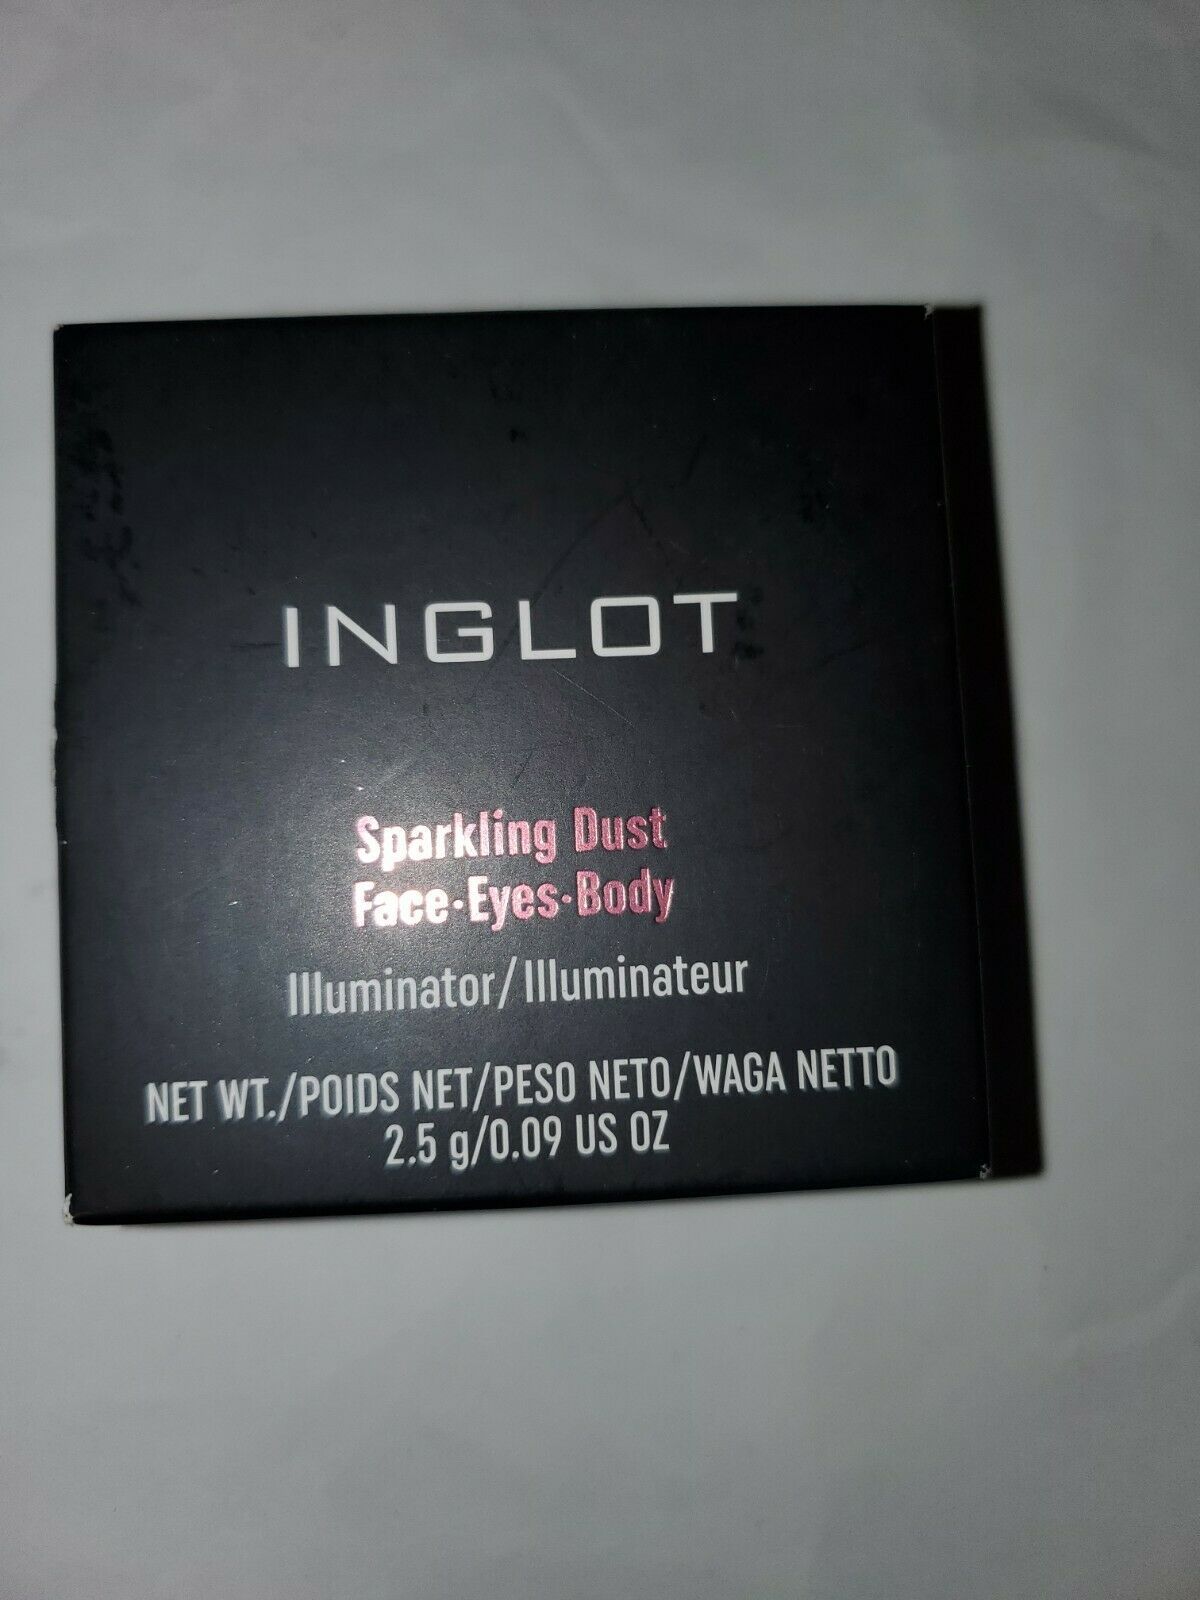 INGLOT Sparkling Dust FEB for Face, Eyes and Body US - $23.50